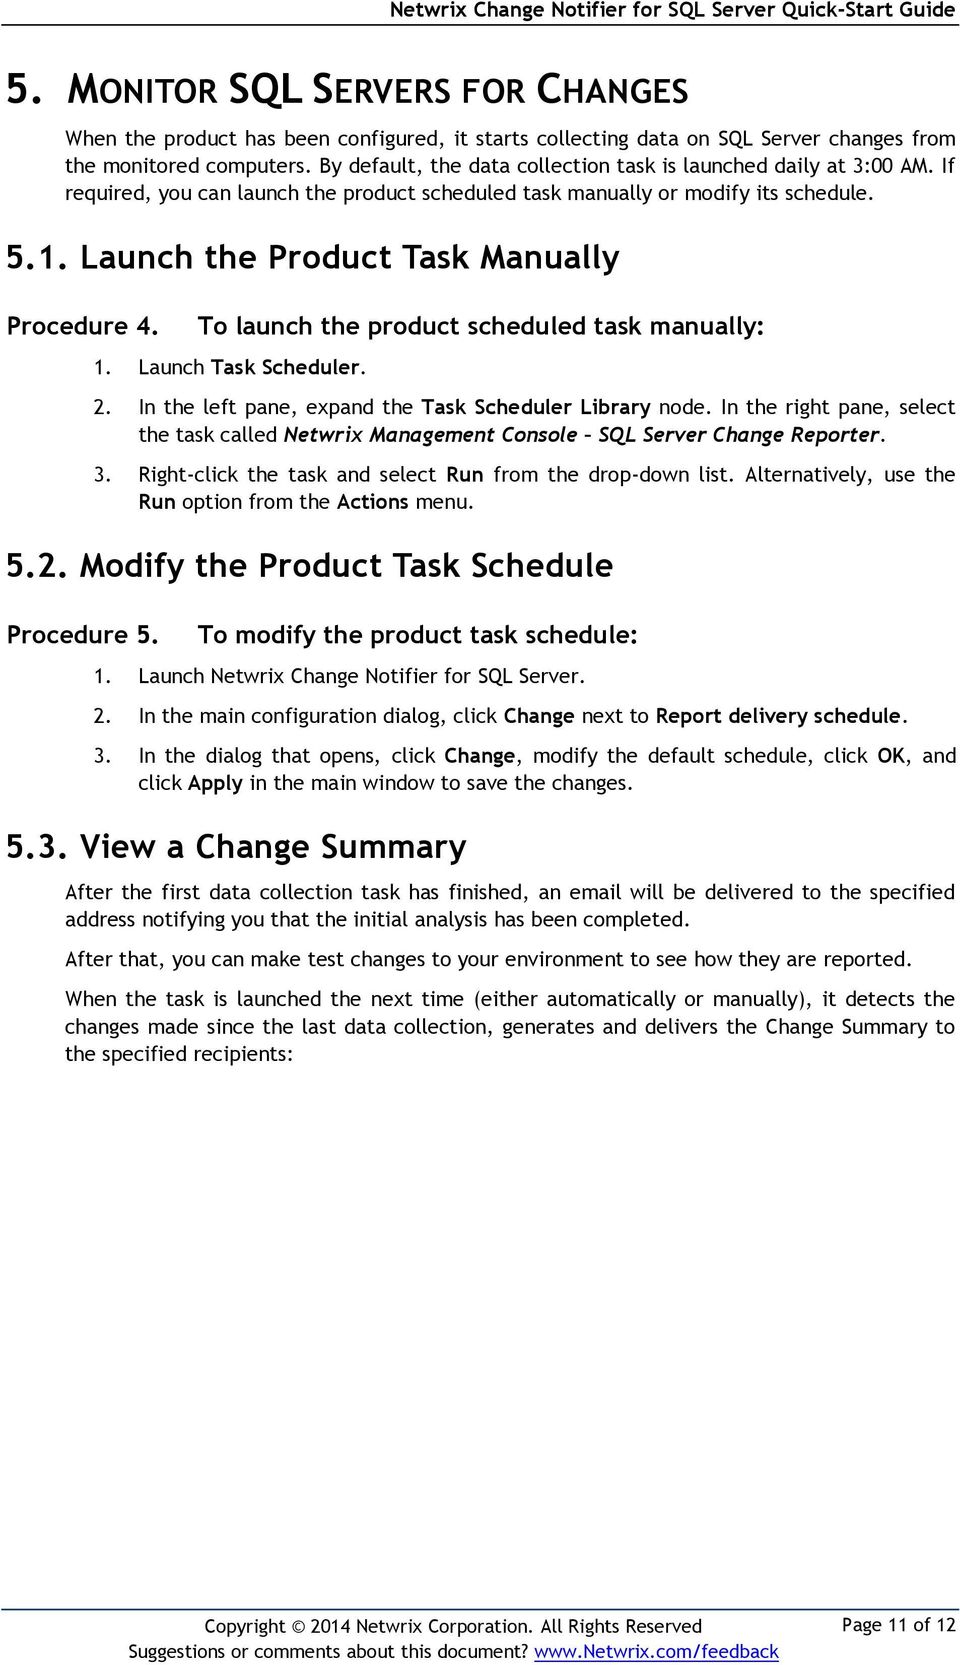 Launch the Product Task Manually Procedure 4. To launch the product scheduled task manually: 1. Launch Task Scheduler. 2. In the left pane, expand the Task Scheduler Library node.